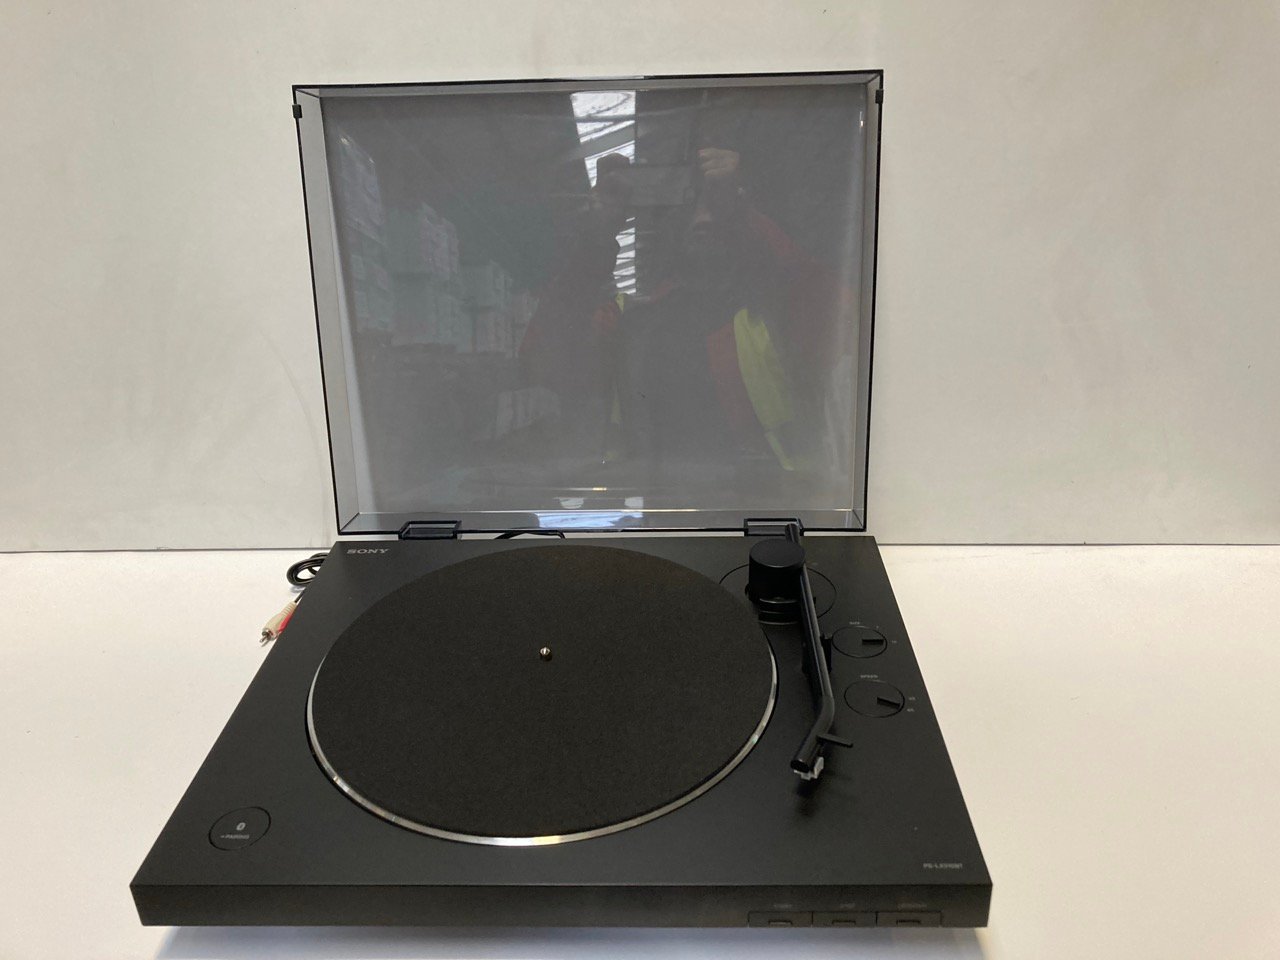 A SONY STEREO TURNTABLE SYSTEM, MODEL PS-LX310BT RRP £199.00